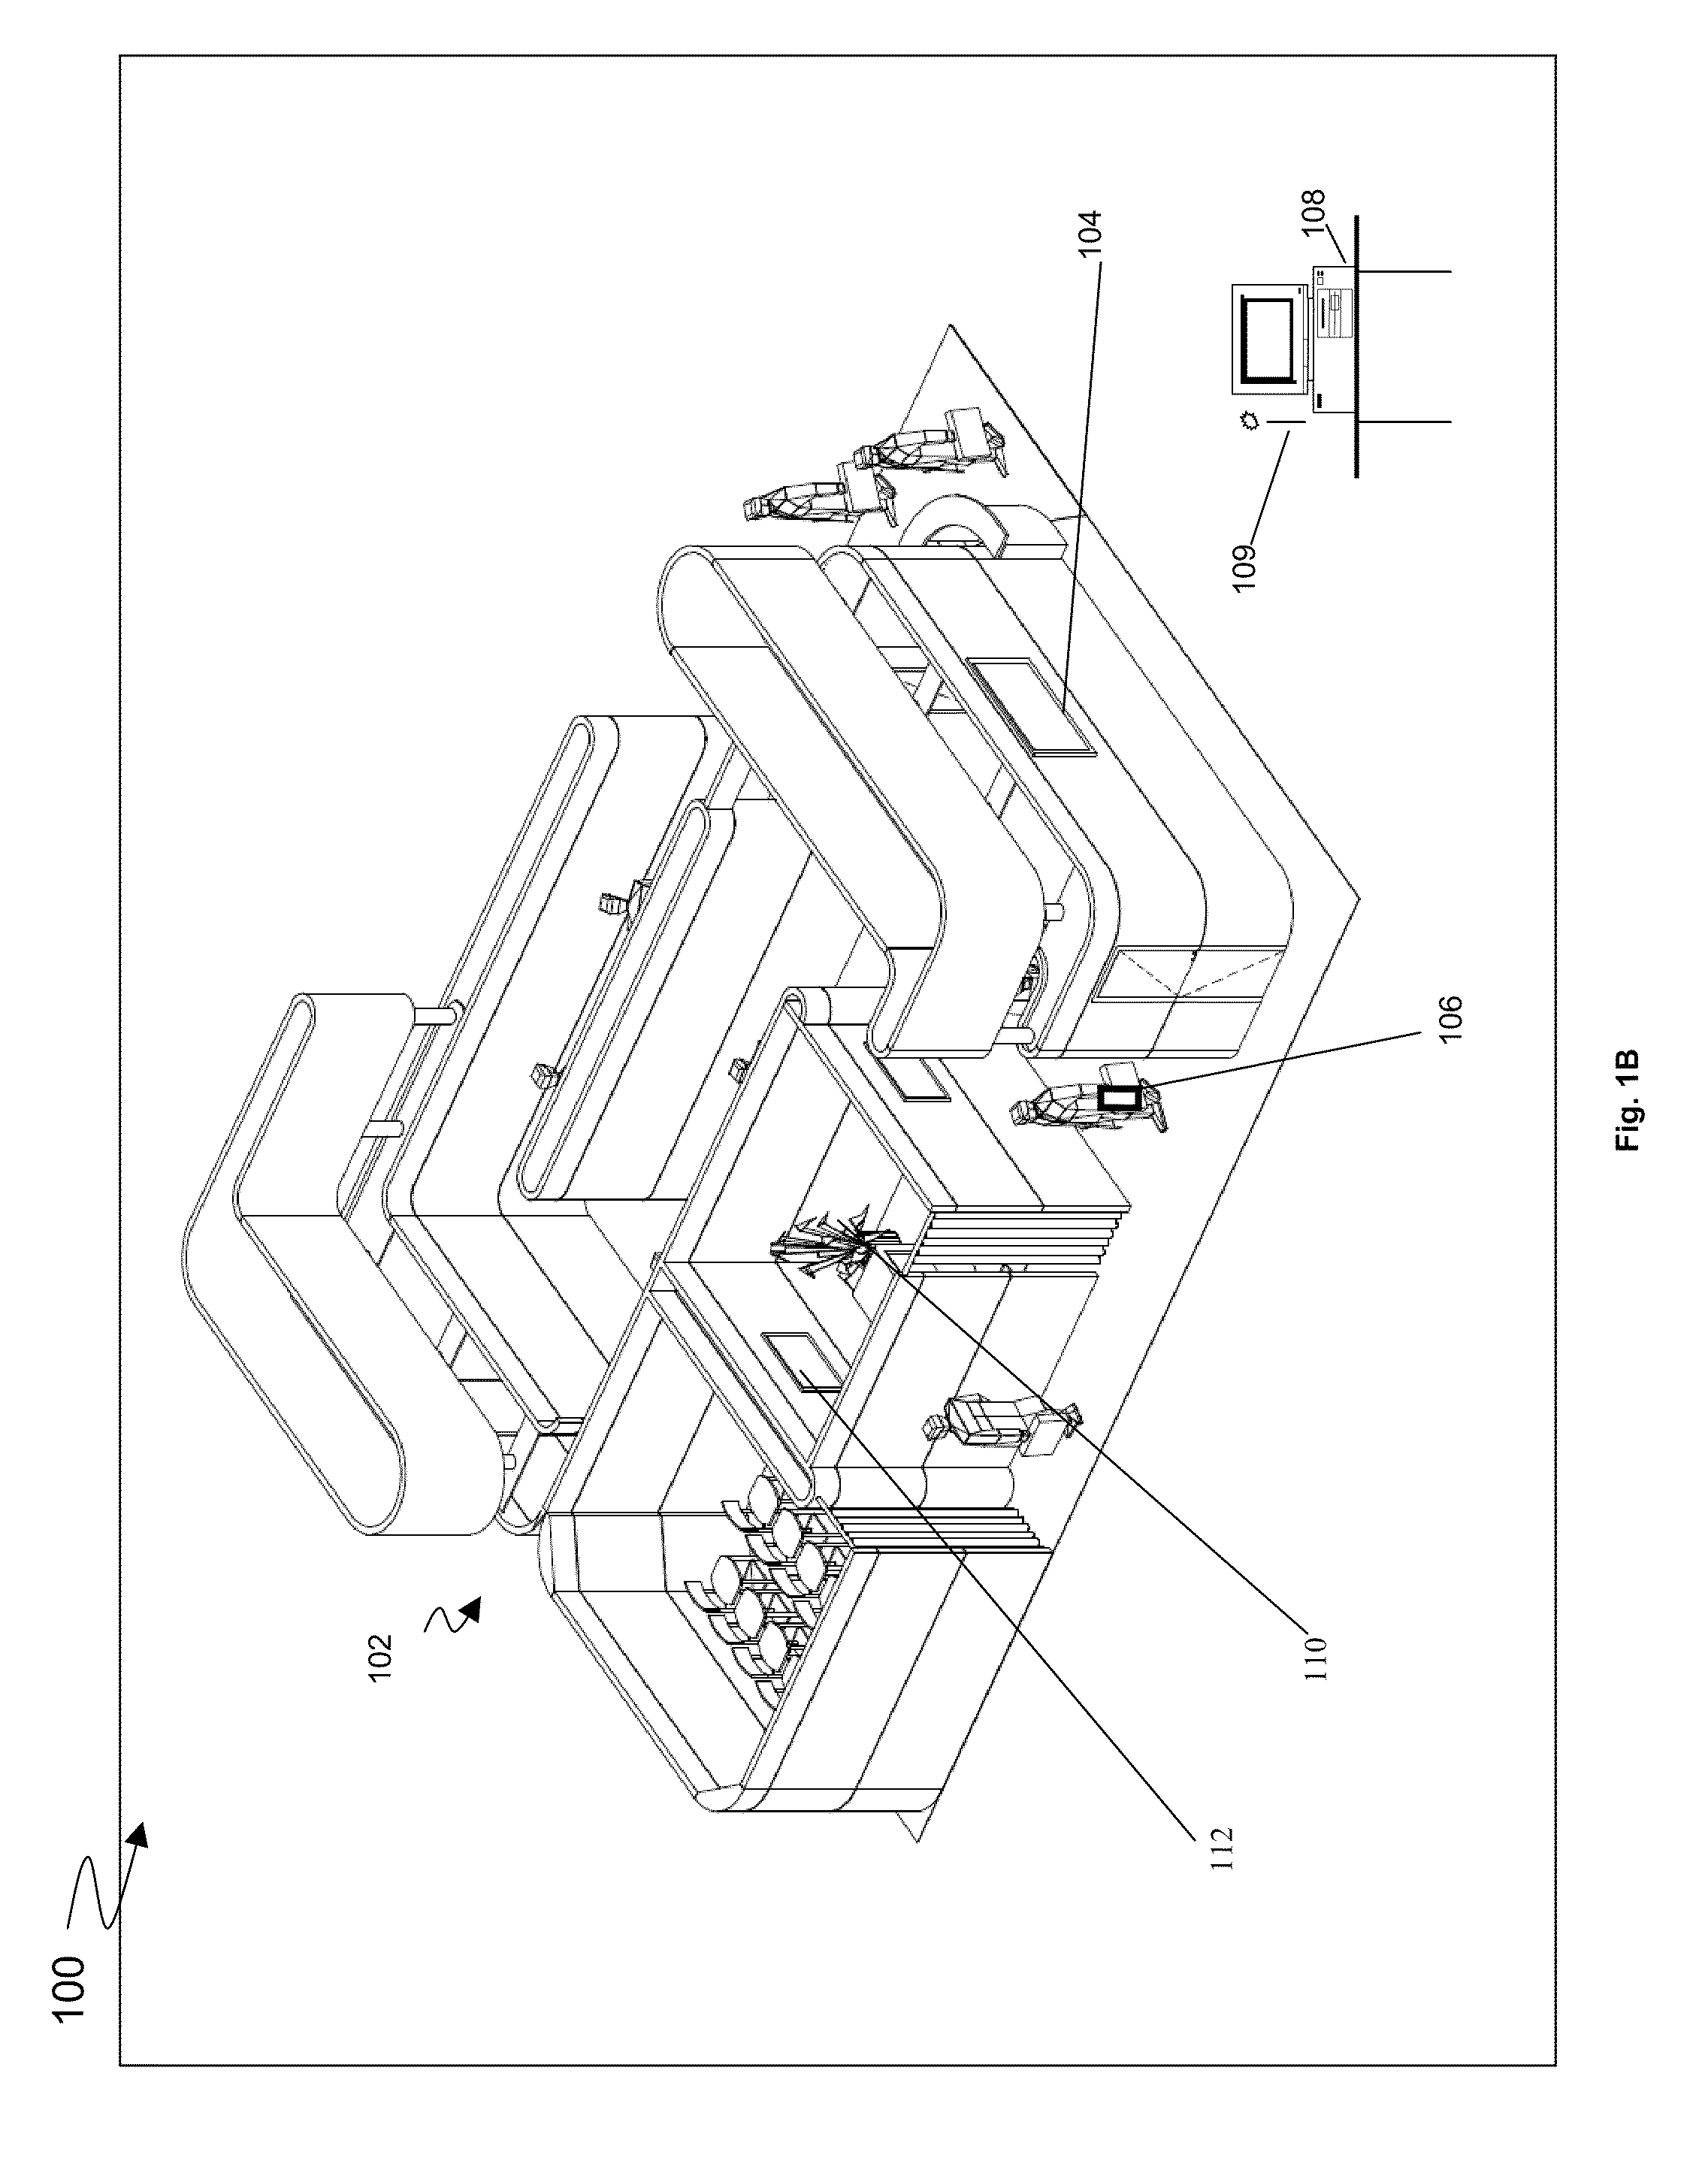 Interactive education system and method